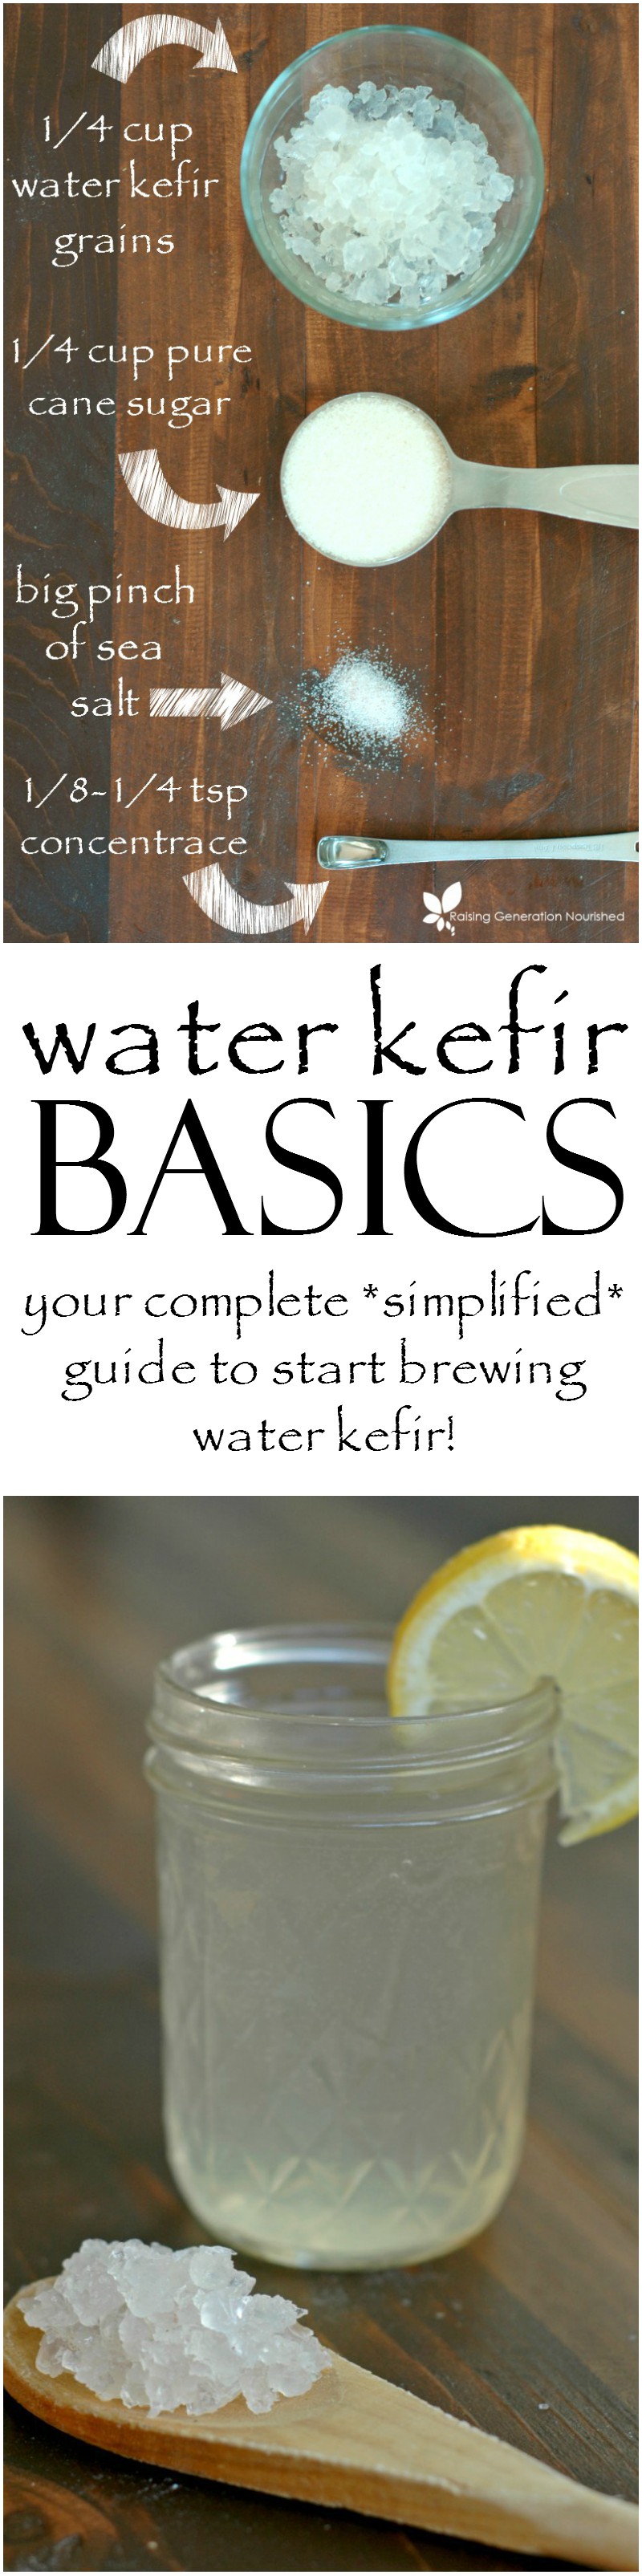 Water Kefir Basics :: Water kefir is an easy to make, naturally fermented drink that is allergen friendly and loaded with probiotics, B vitamins, and food enzymes.